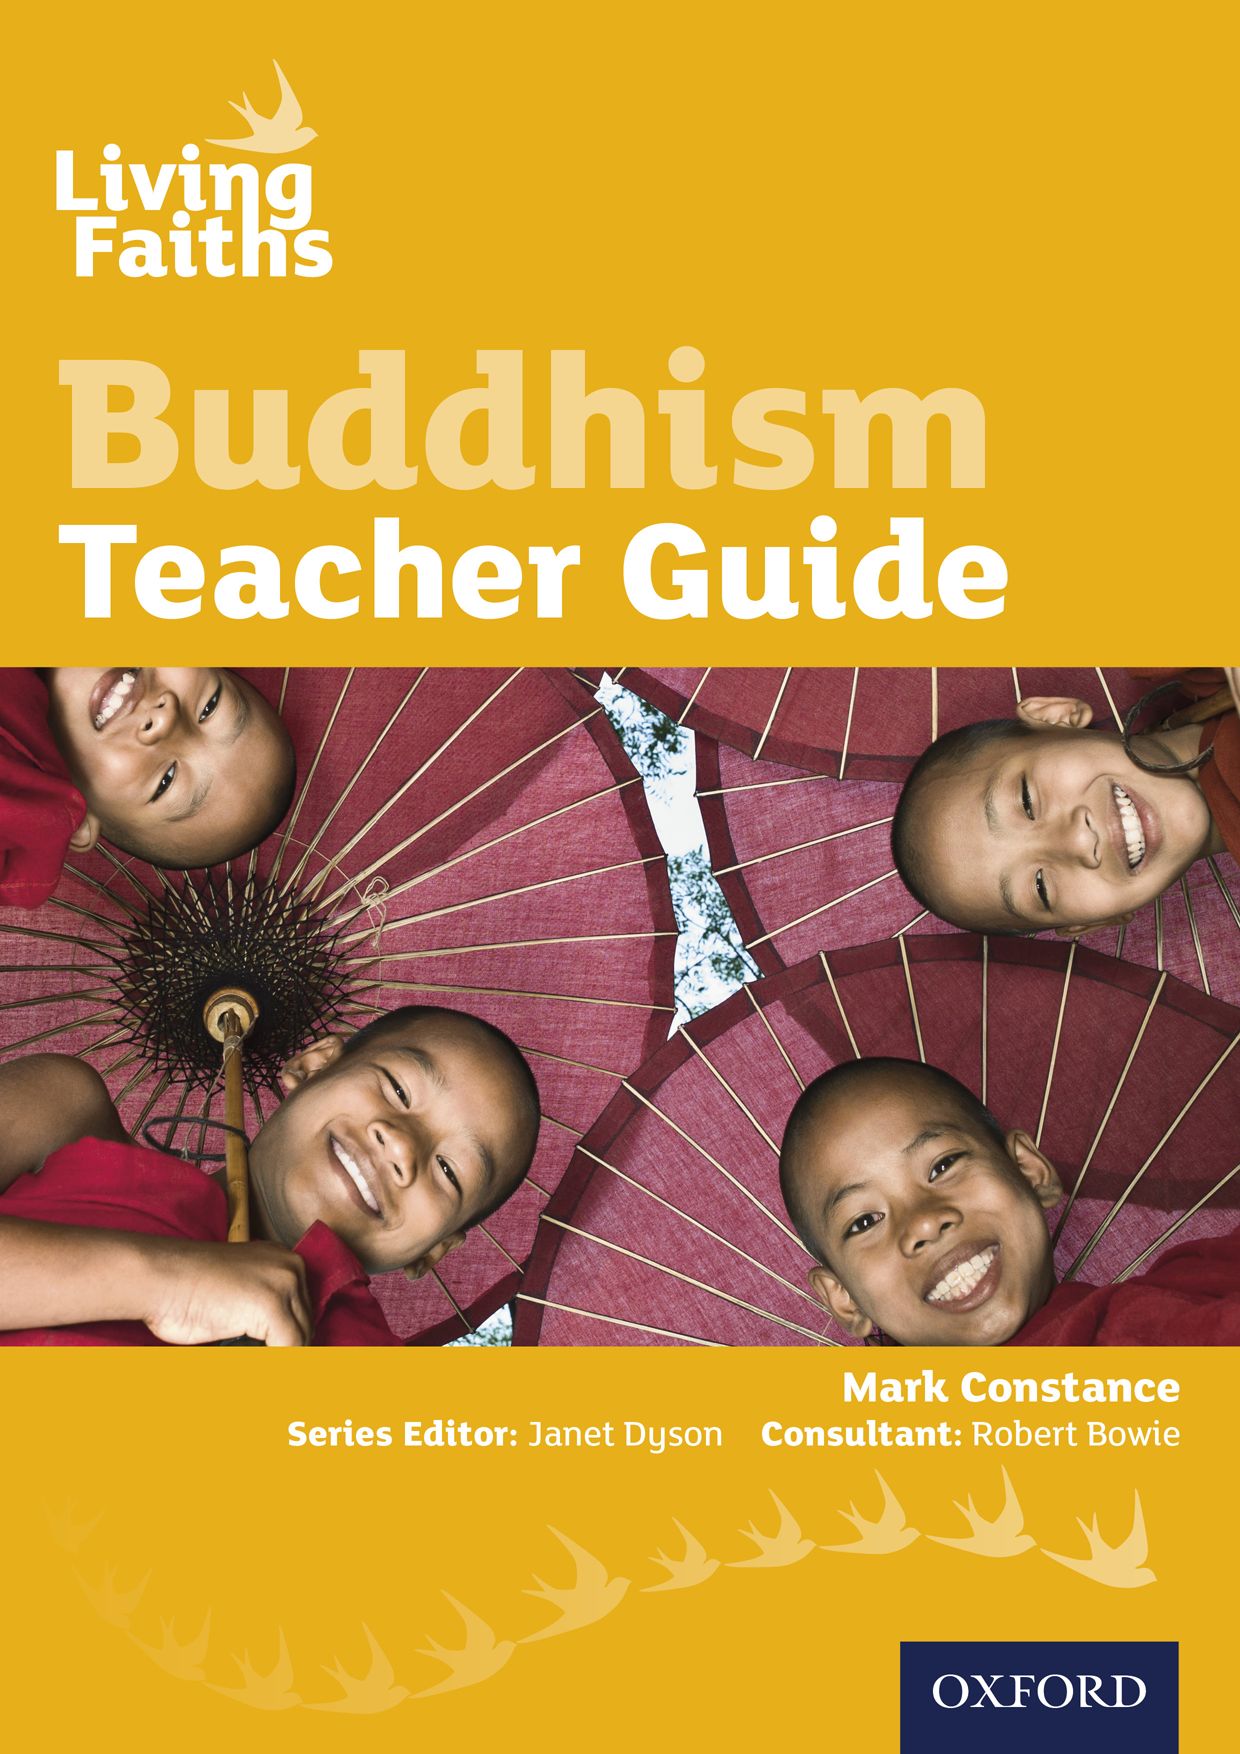 Featured image for “Living Faiths Buddhism Teacher Guide”